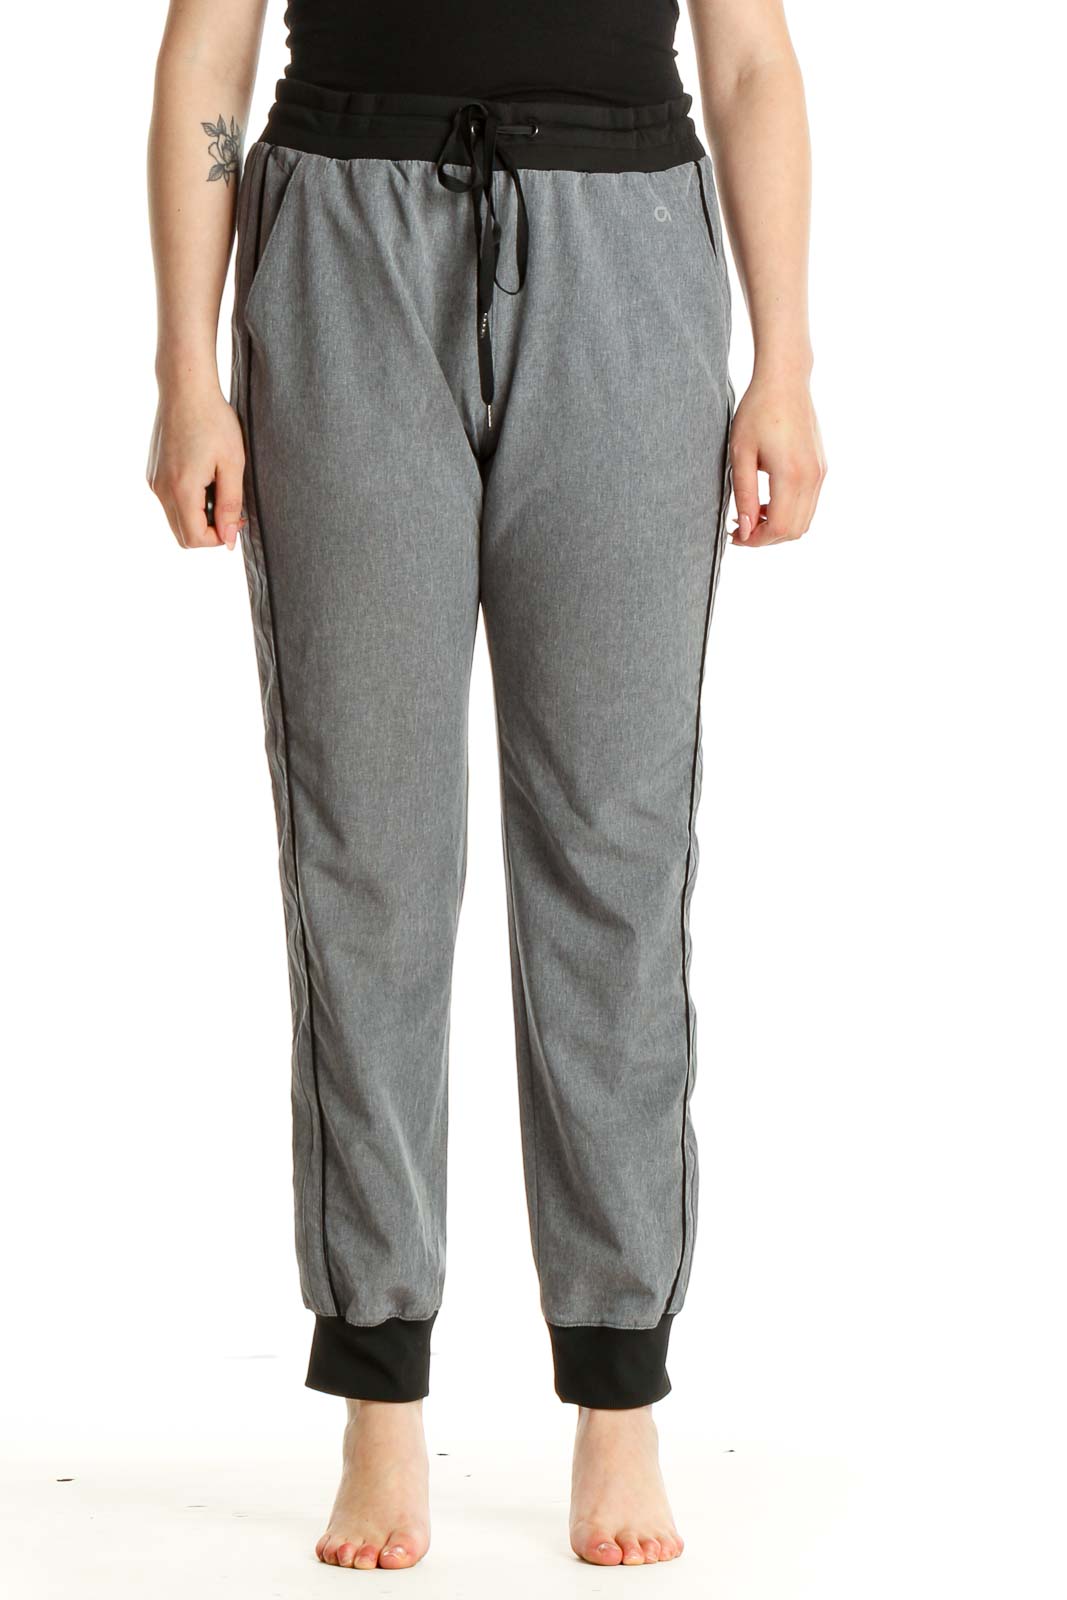 Gray Textured Casual Sweatpants Front